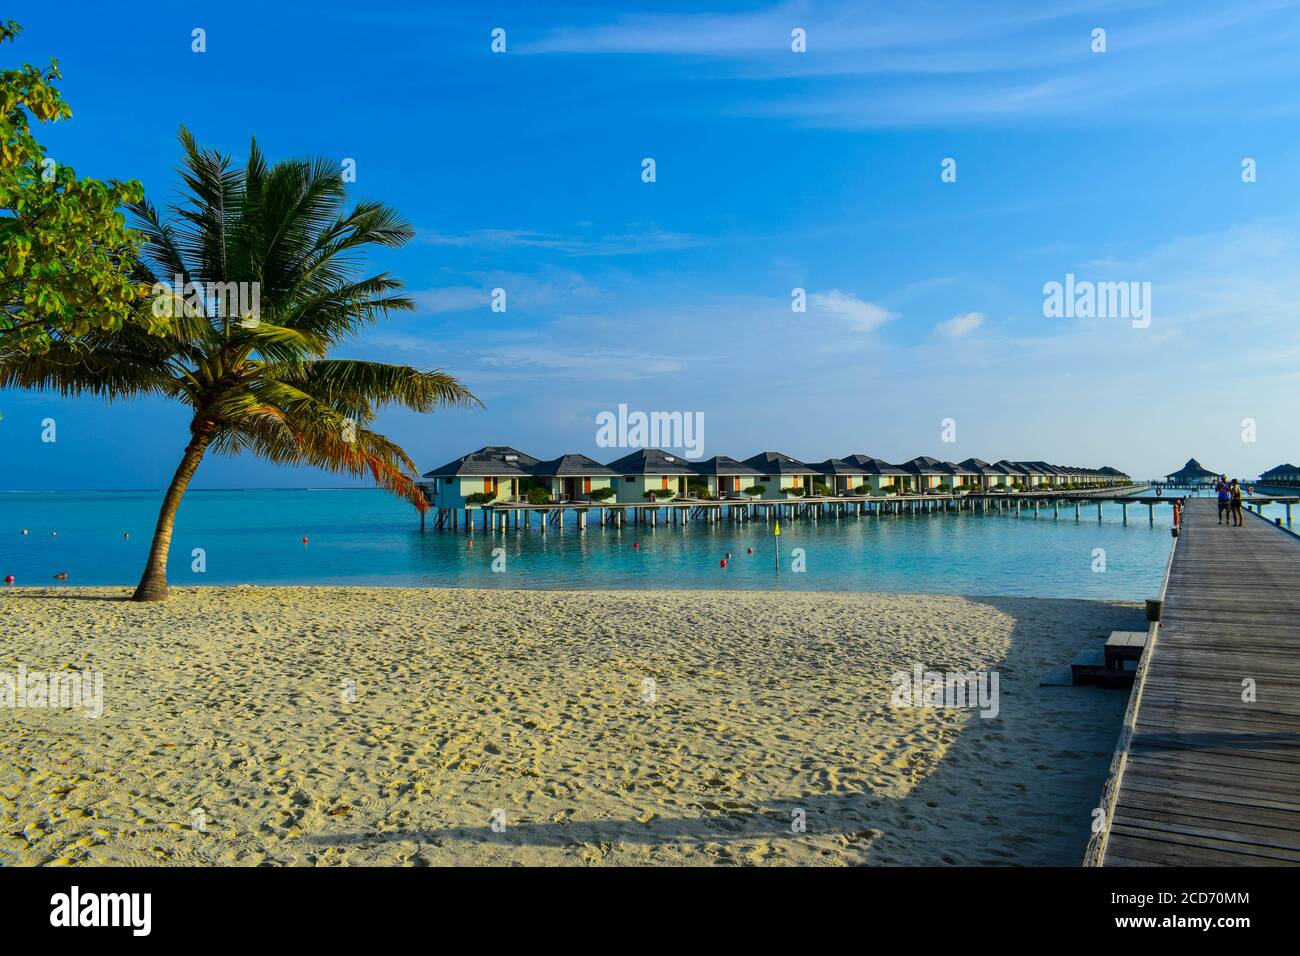 Sunny beach with white sand, coconut palm trees and turquoise sea. Summer vacation and tropical beach concept. Overwater at Maldive Island resort. Stock Photo